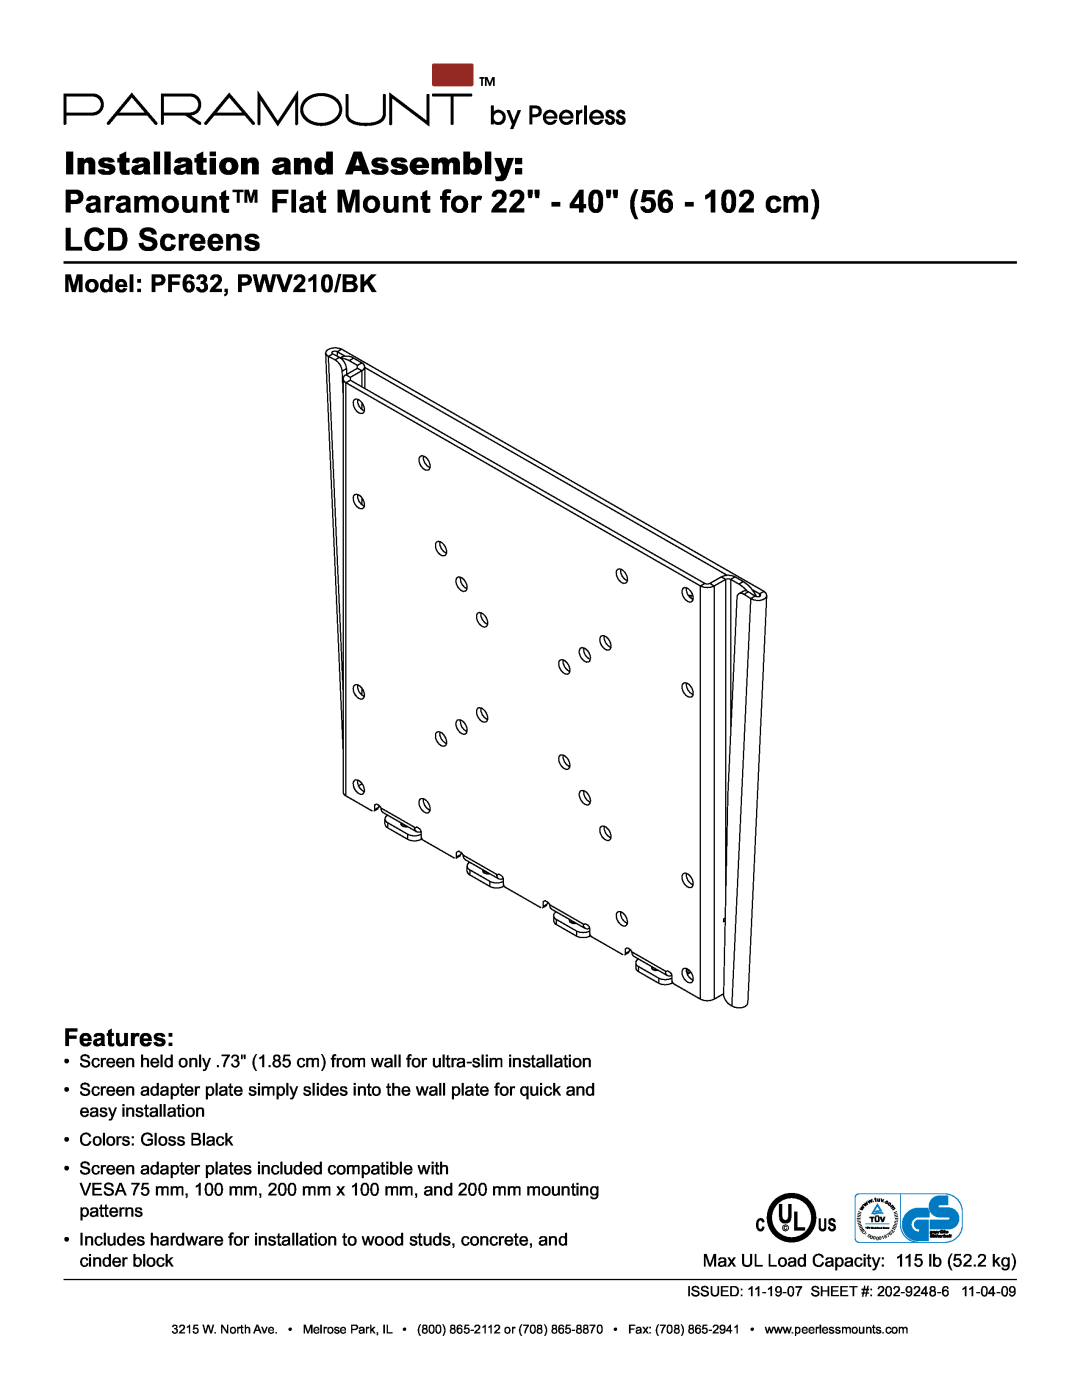 Peerless Industries PWV210/BK manual Installation and Assembly, Paramount Flat Mount for 22 - 40 56 - 102 cm LCD Screens 